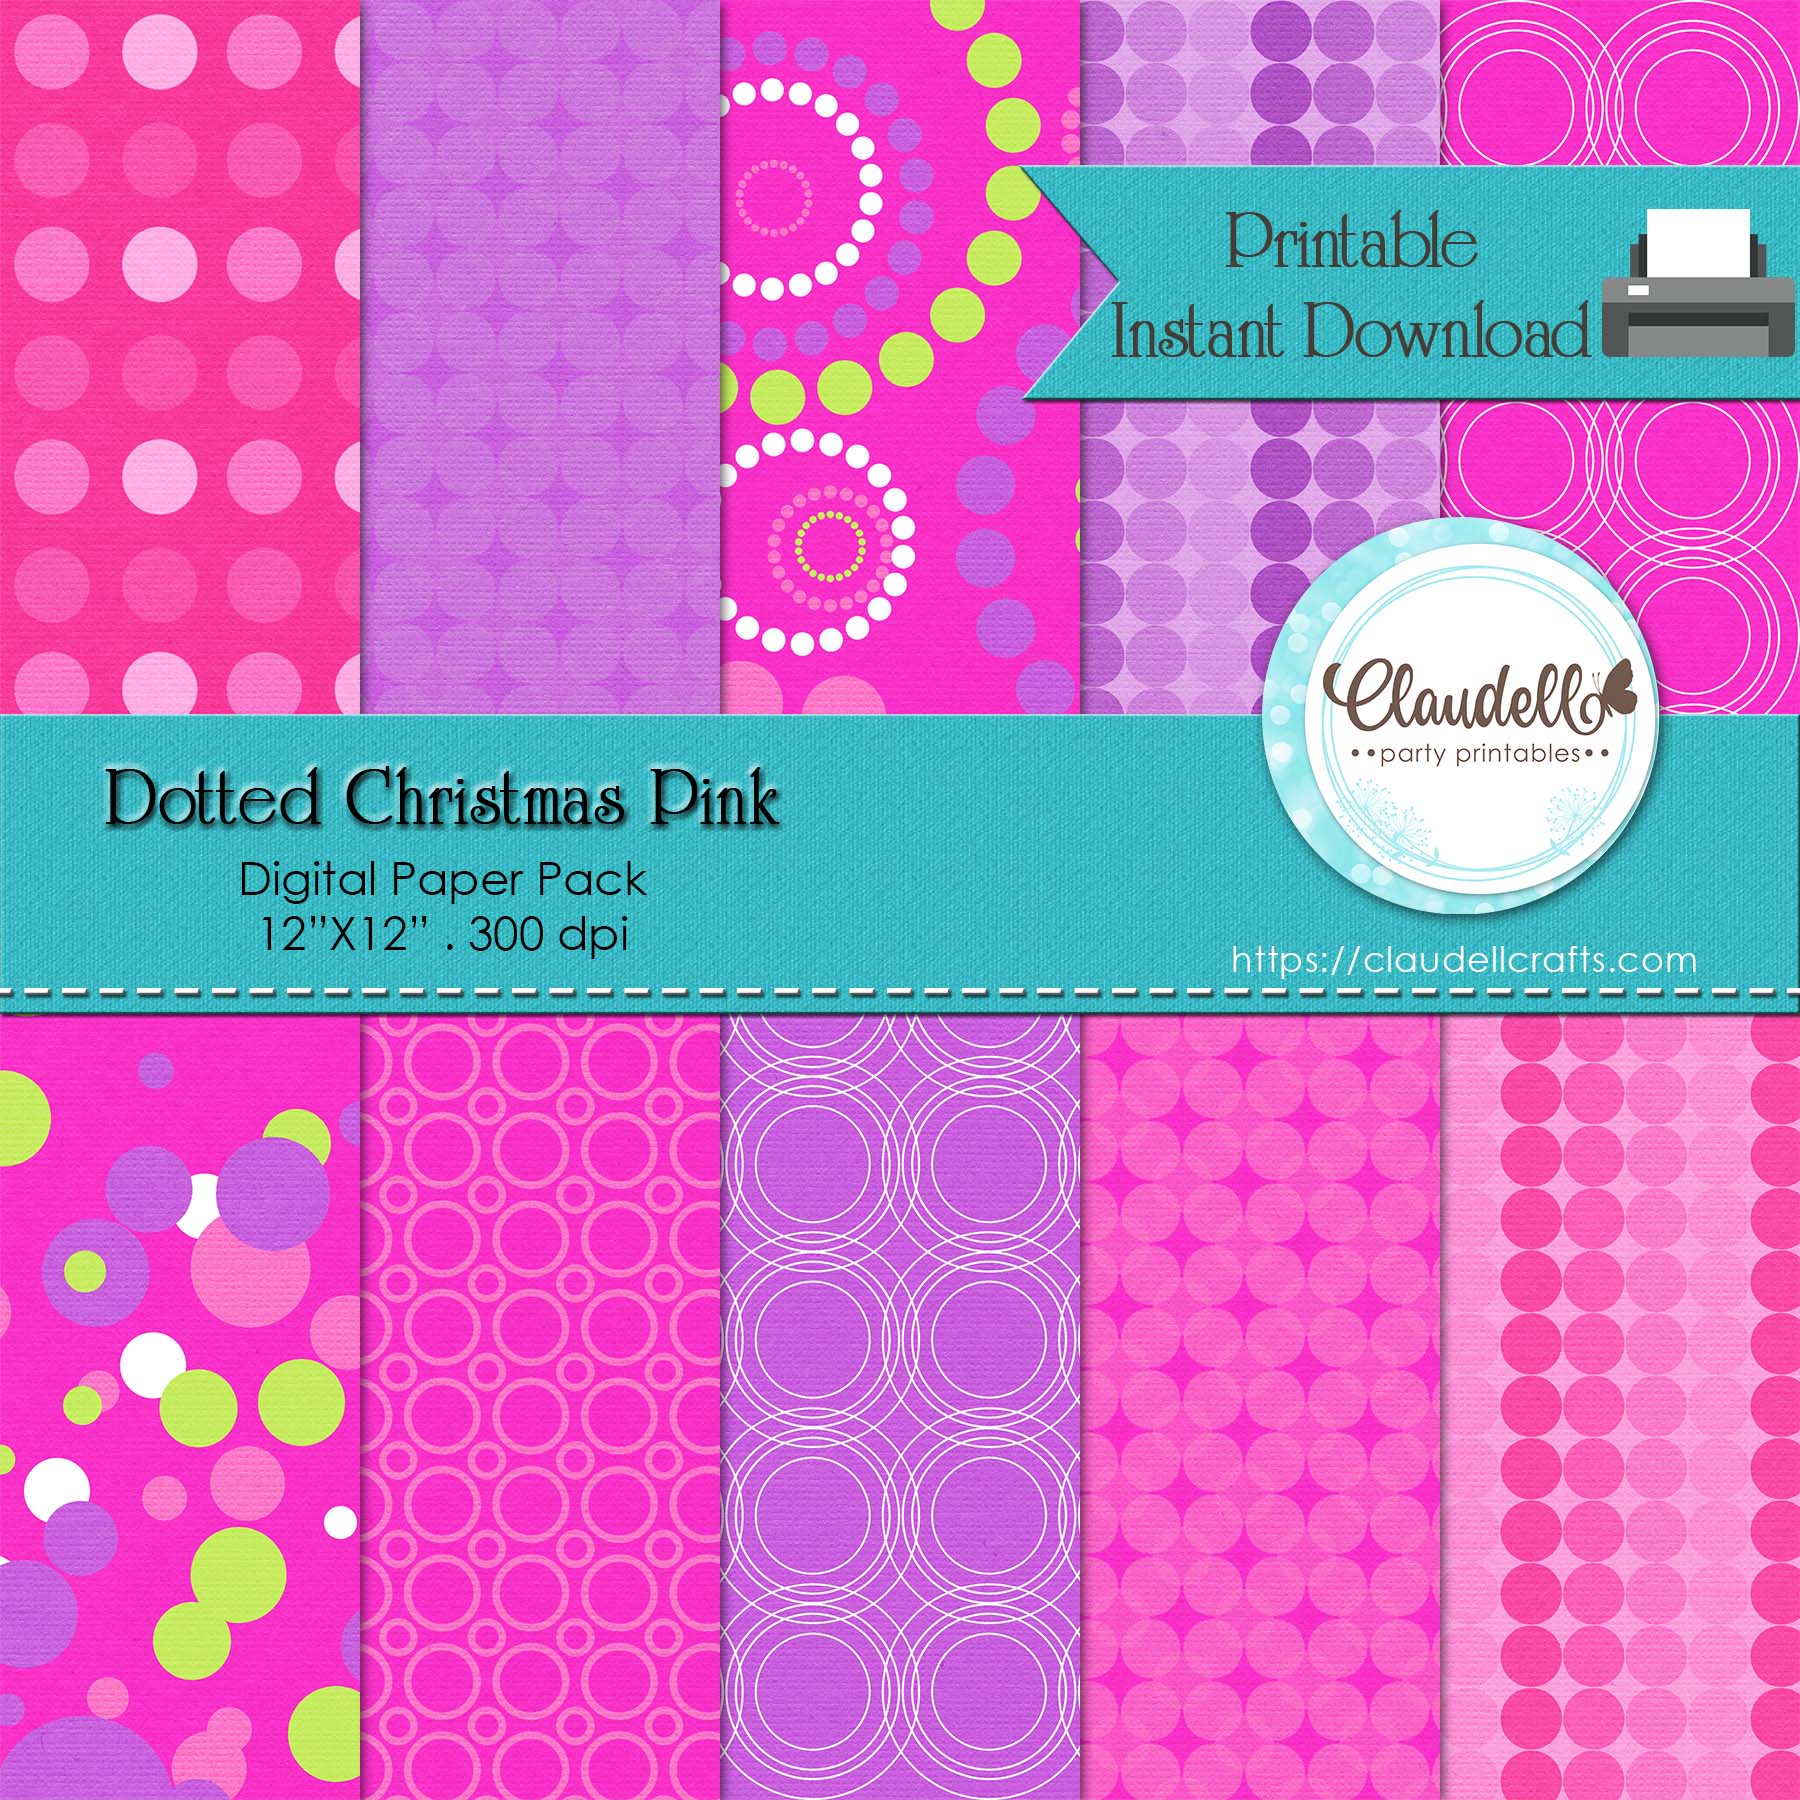 Dotted Christmas Pink Digital Paper Pack (10) - 12